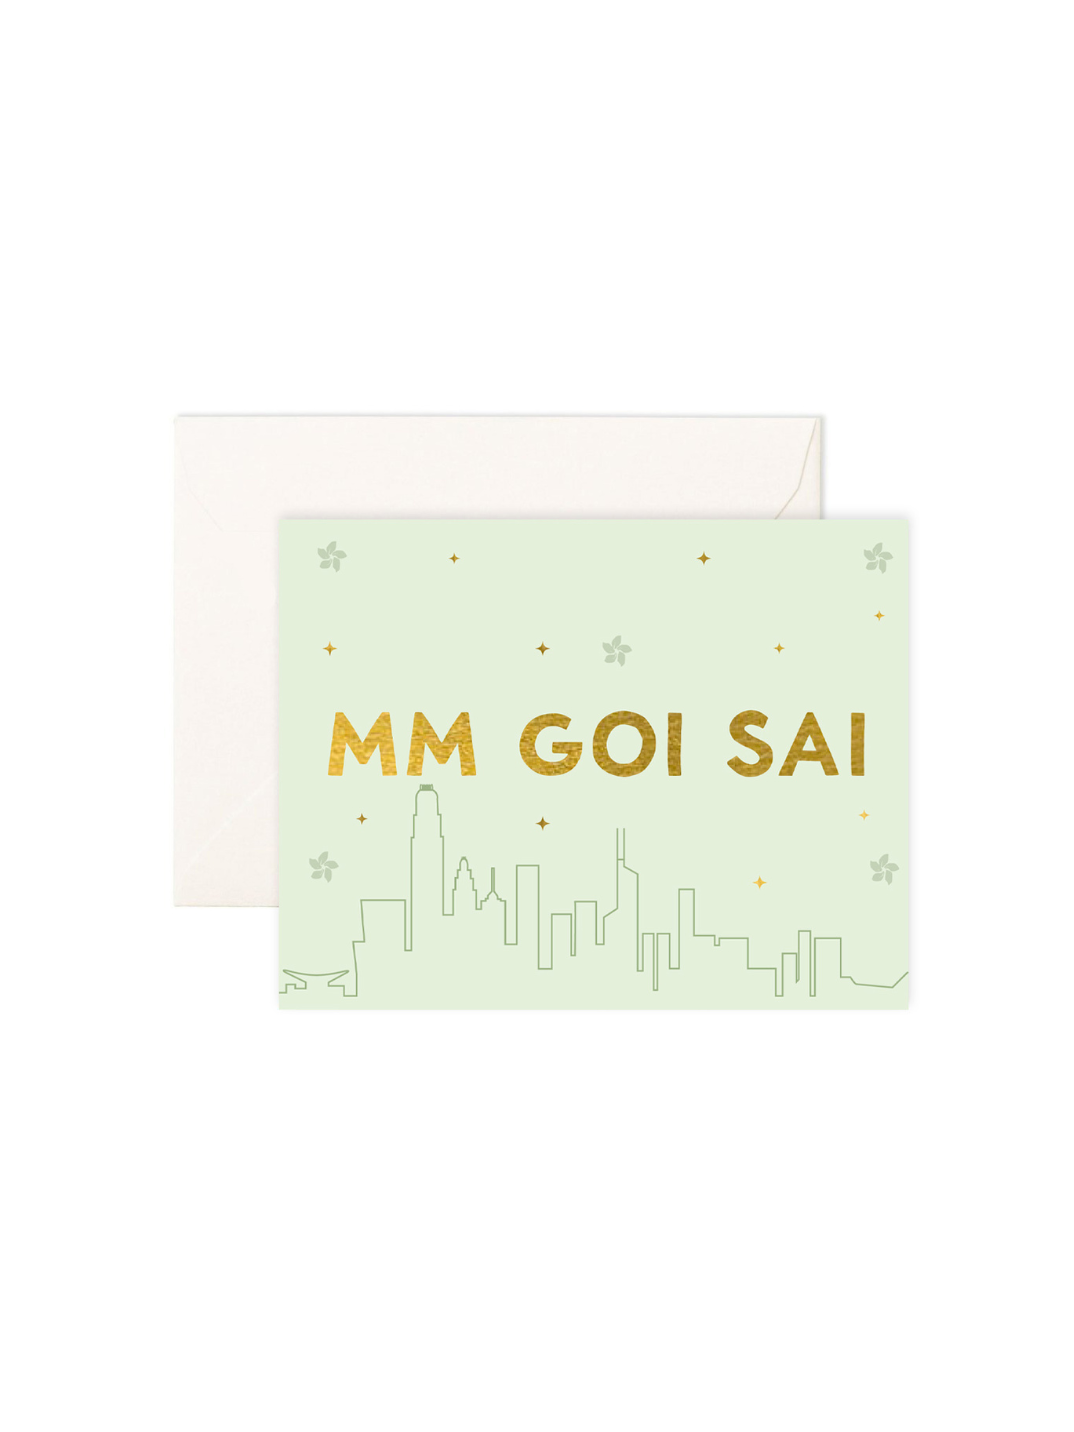 Eco-friendly greeting card printed on recycled paper cute food-inspired design shop sustainable ethical brands women-owned brands kind on the planet thank you card in Cantonese Hong Kong skyline